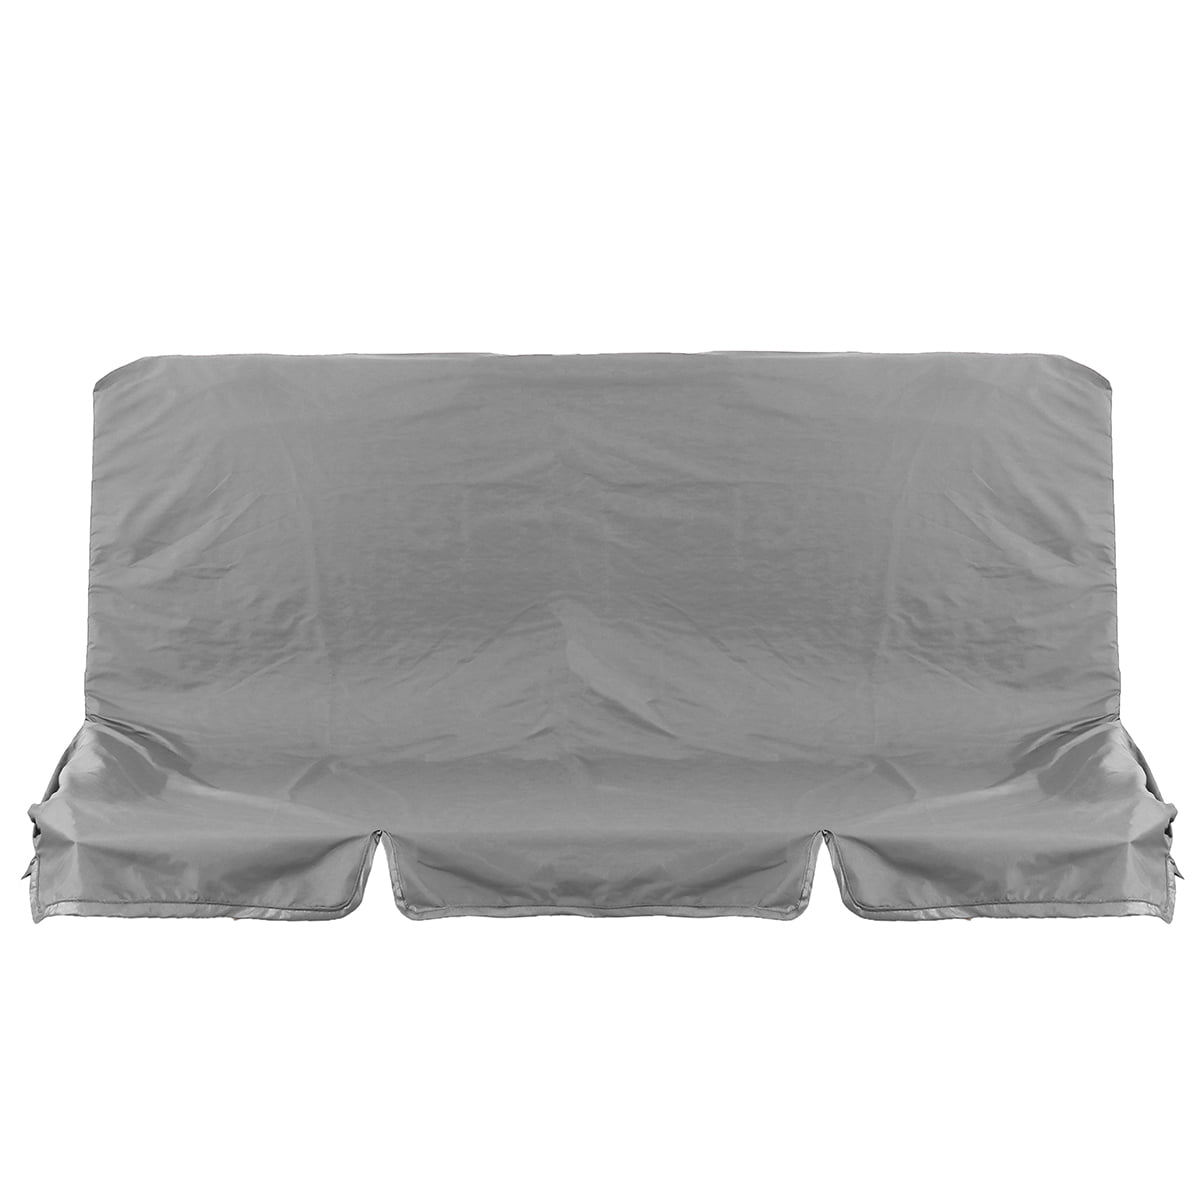 Patio Swing Cushion Cover Replacement 59x59x4 Inch 3 Seater Outdoor Swing Seat Cover for Garden Swing Seat Cushion 